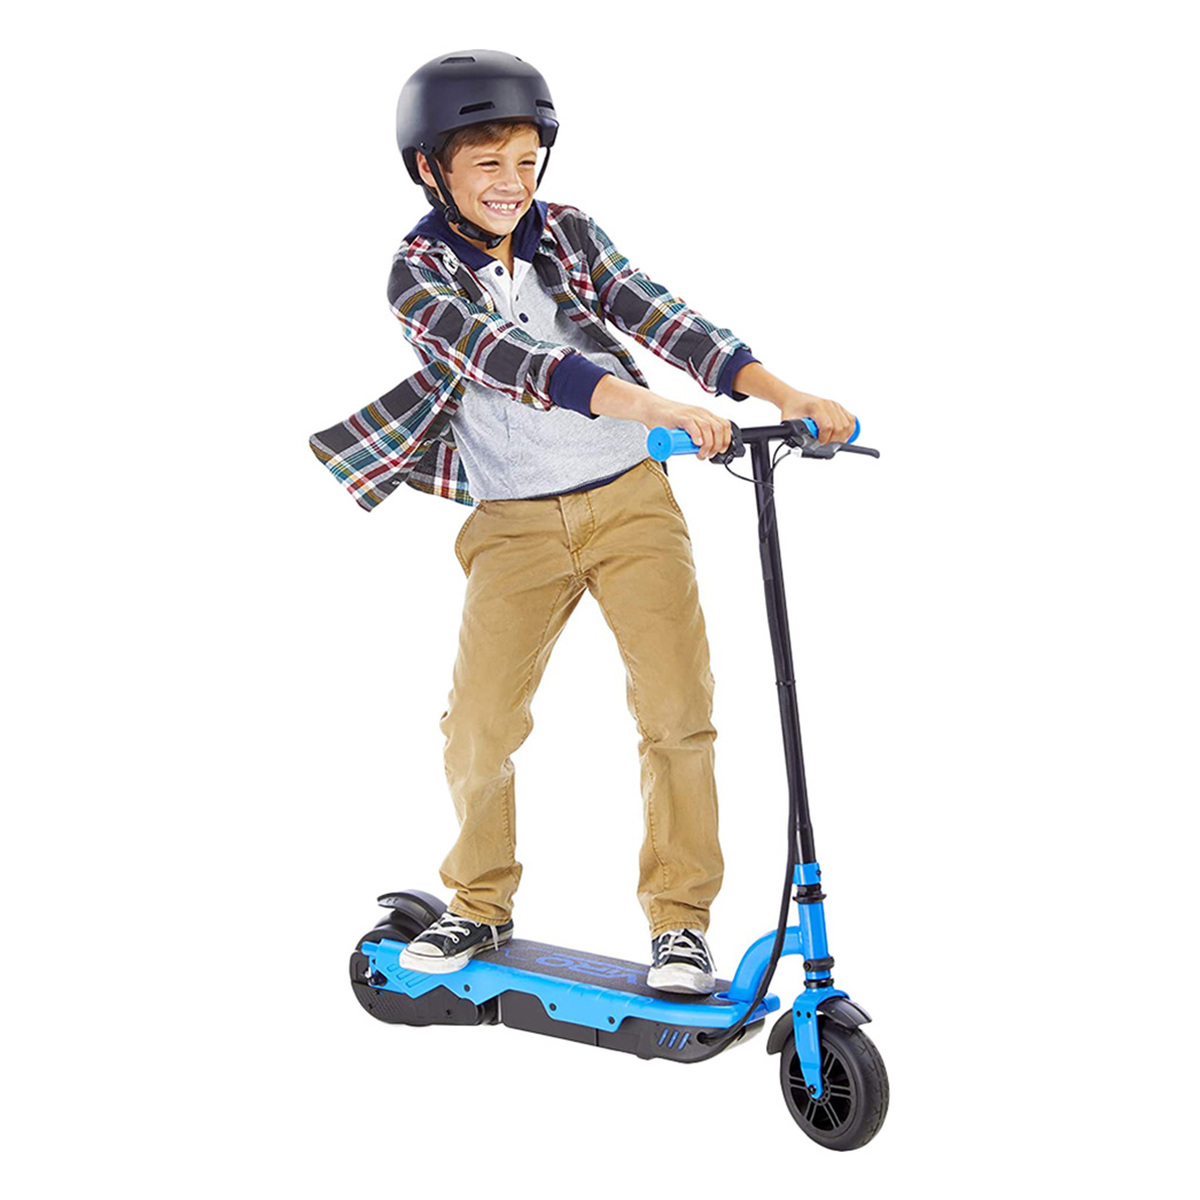 Little Tikes  Viro Rides 550E Electric Scooter  Blue